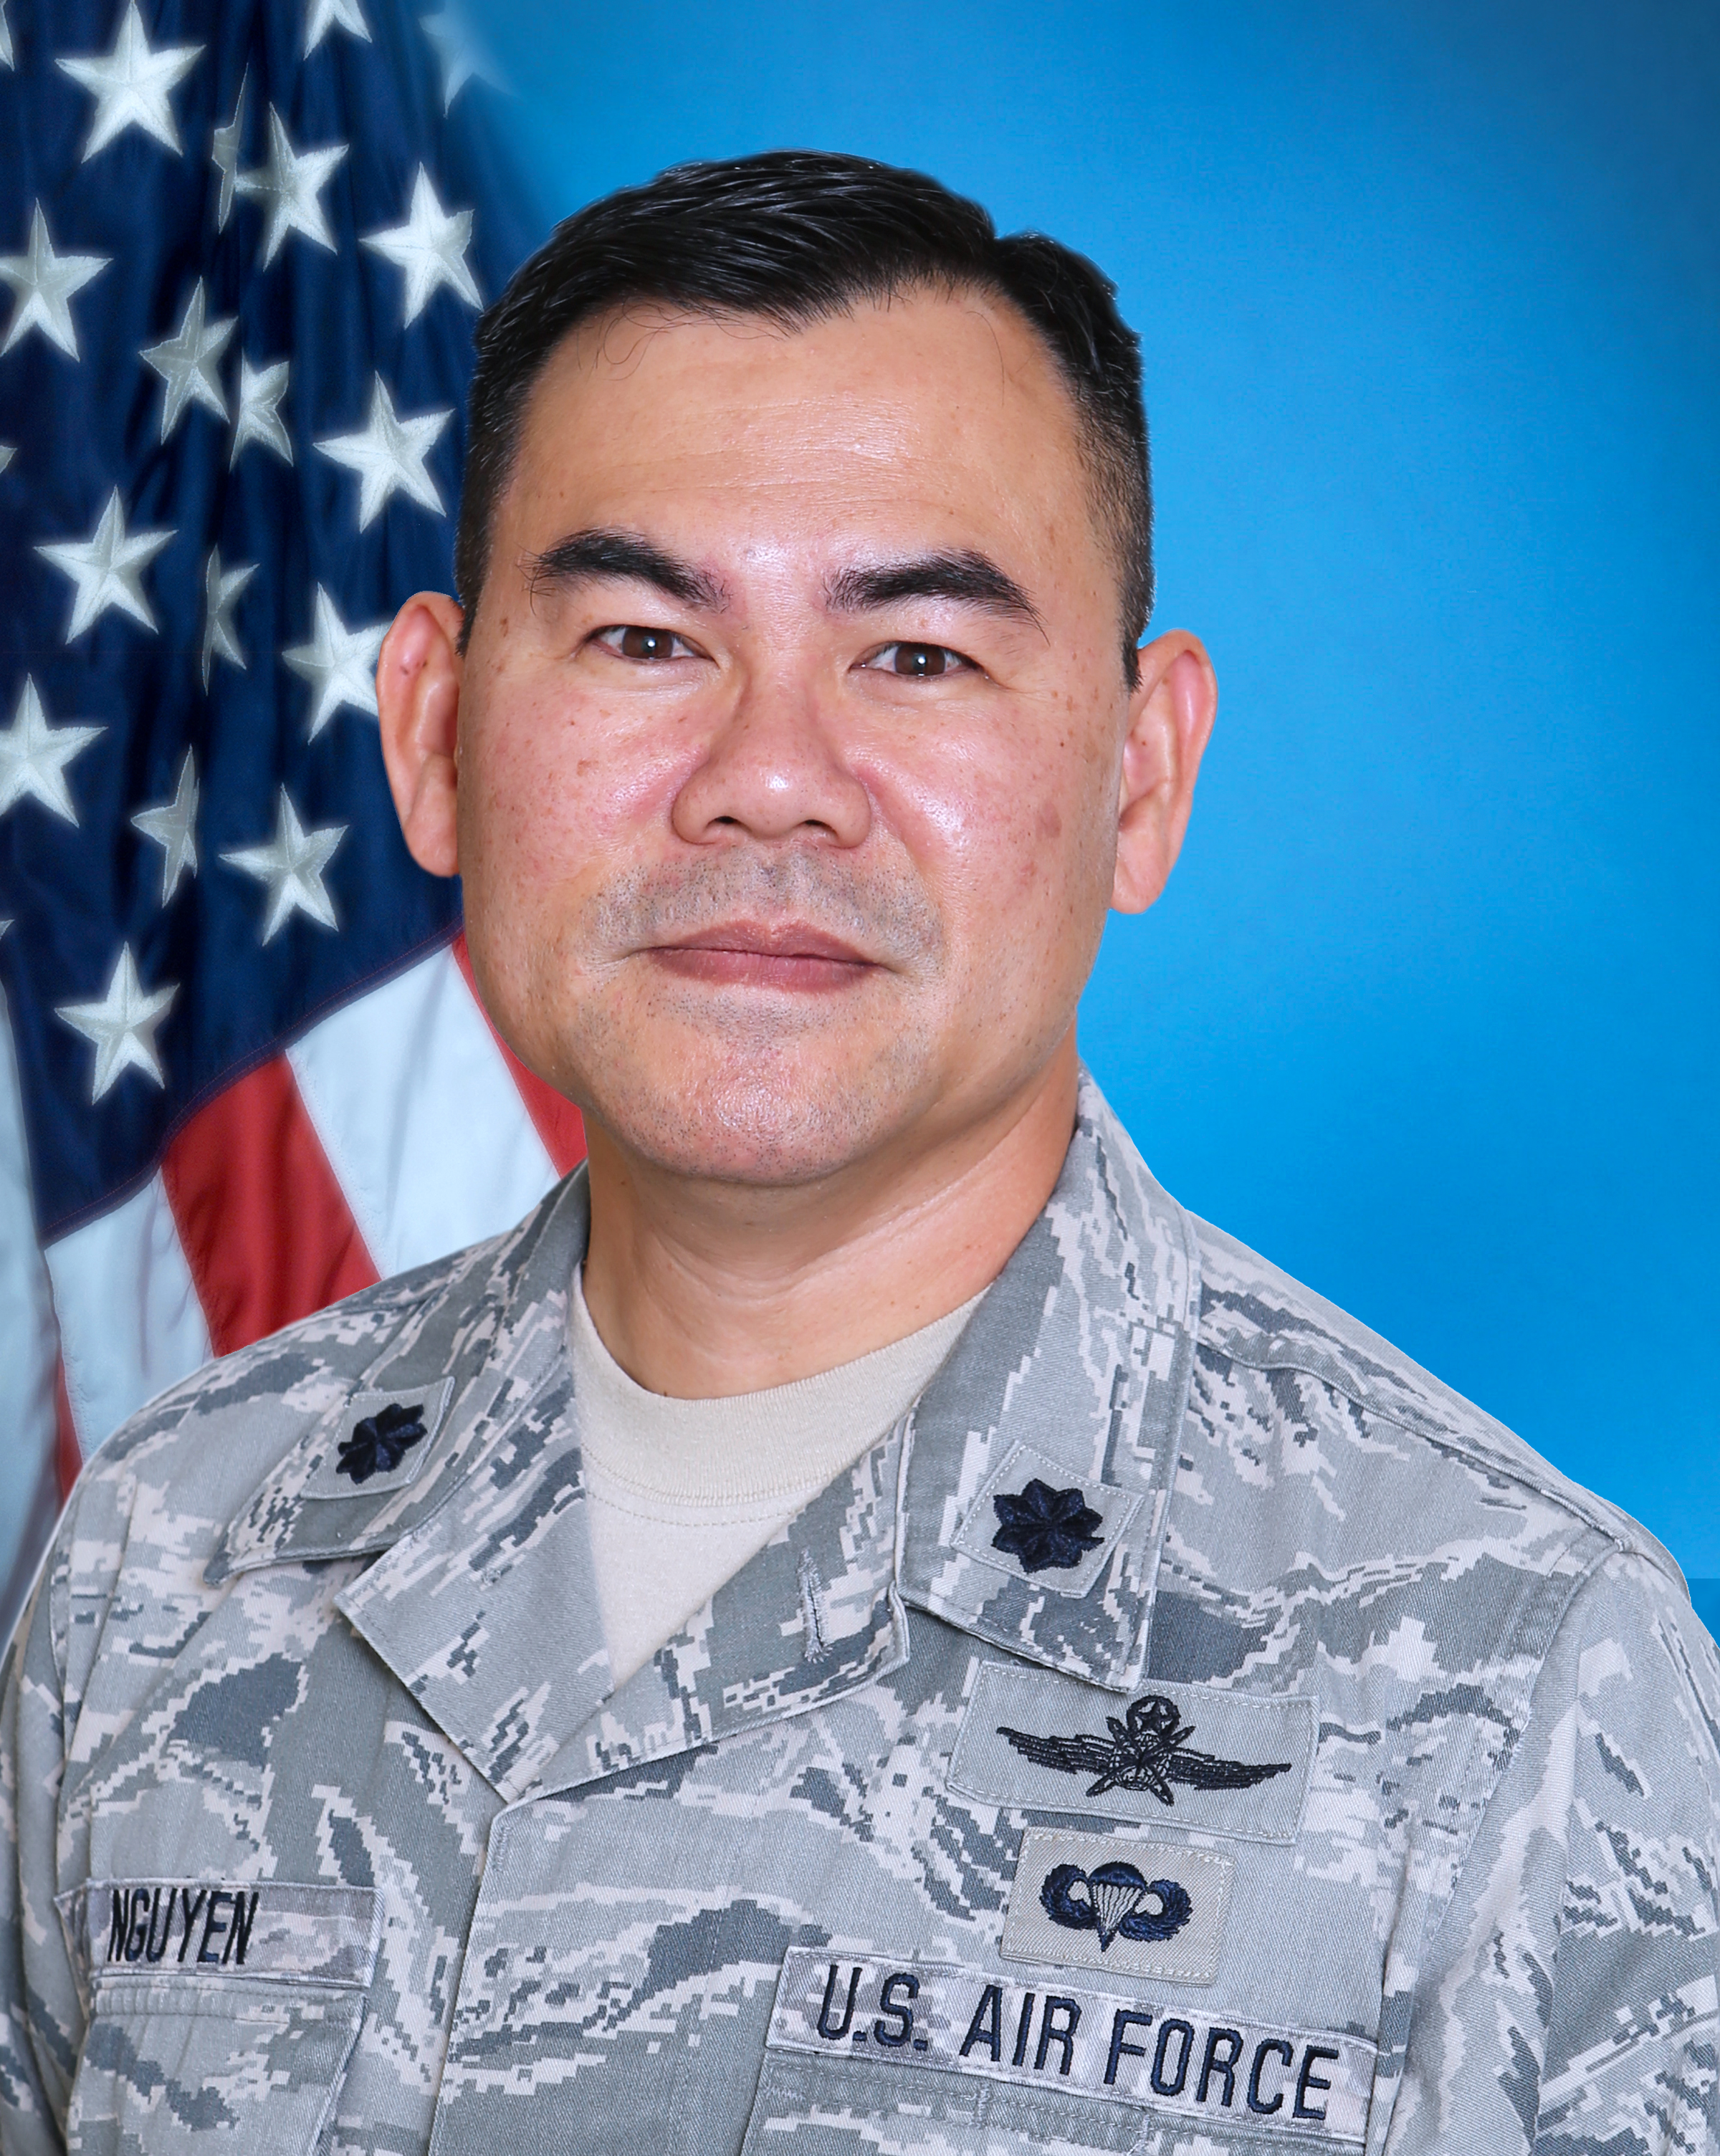 I, Don Nguyen, recently retired as Lieutenant Colonel from US Air Force after 27 yrs of military service.